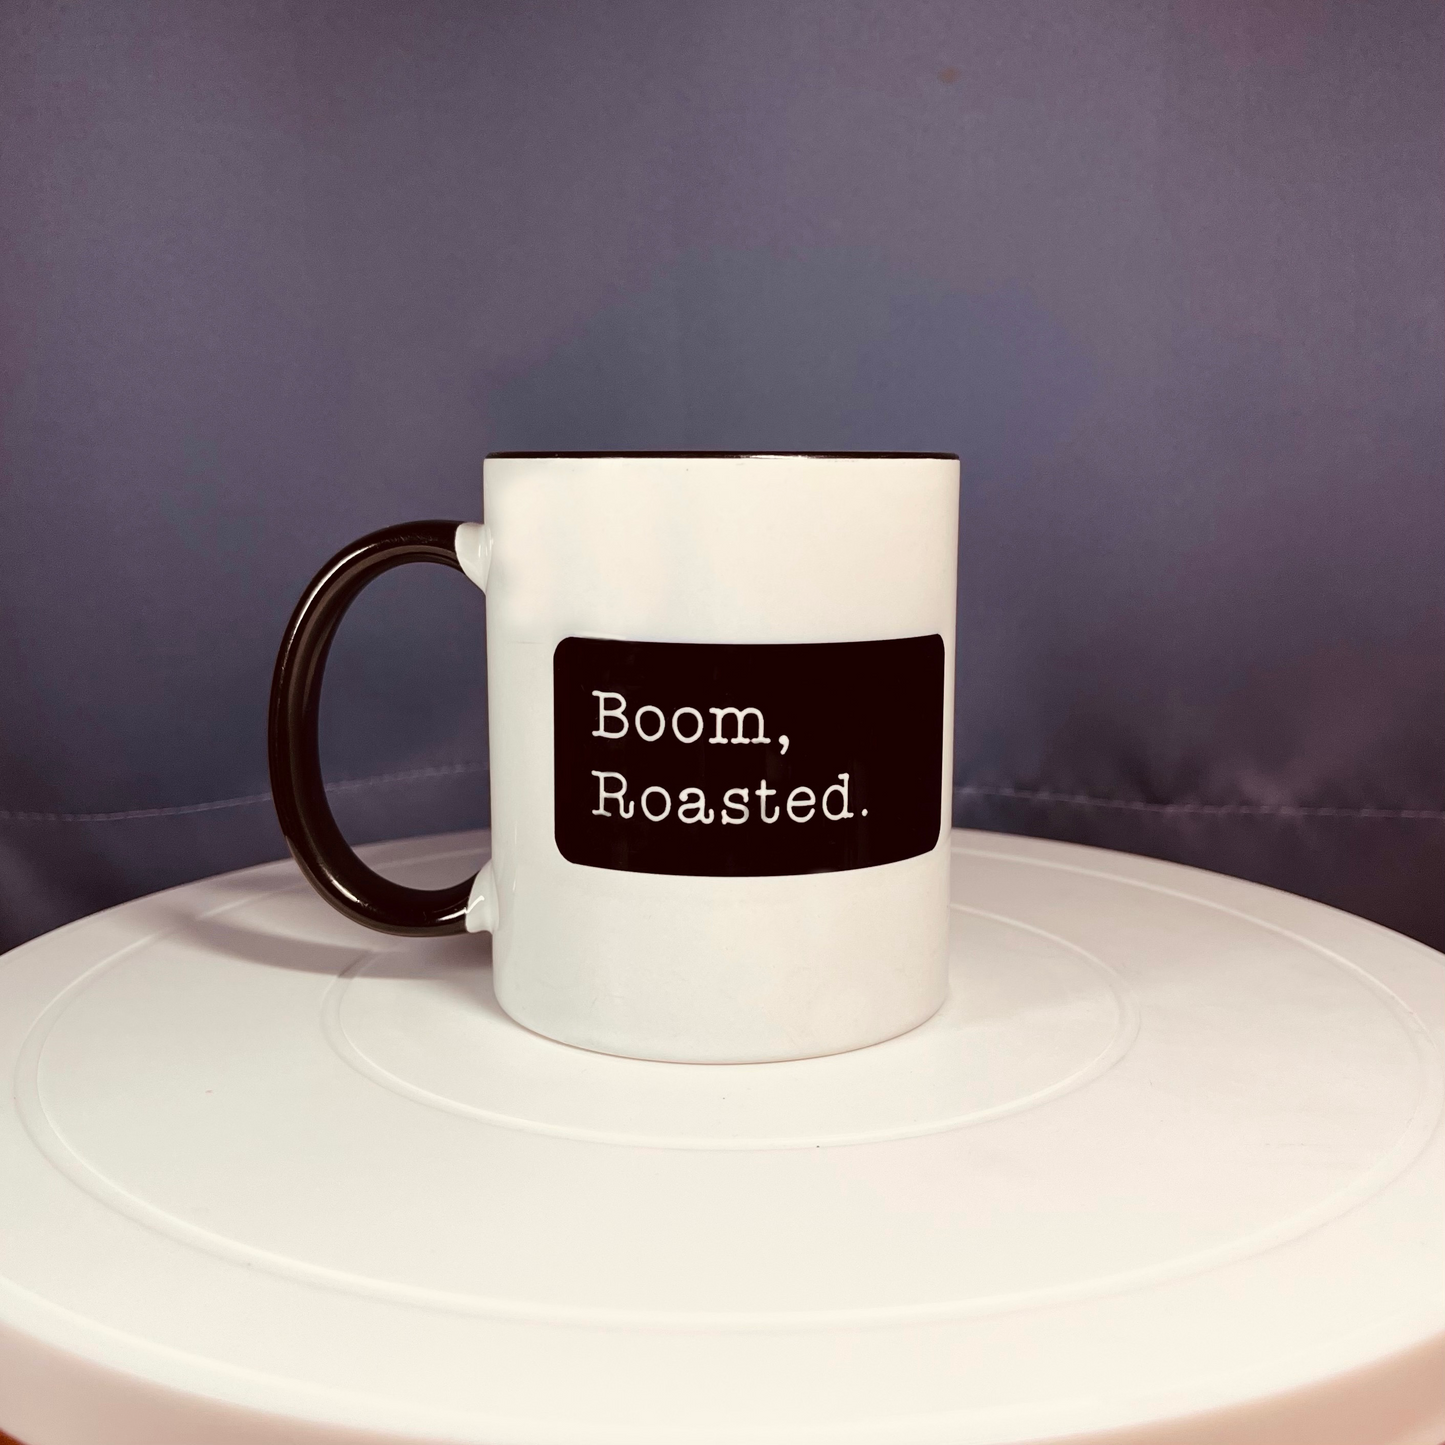 For the love of The Office, coffee mugs & quirky black merchandise. Makes an excellent gift choice for those in love with the sitcom: The Office